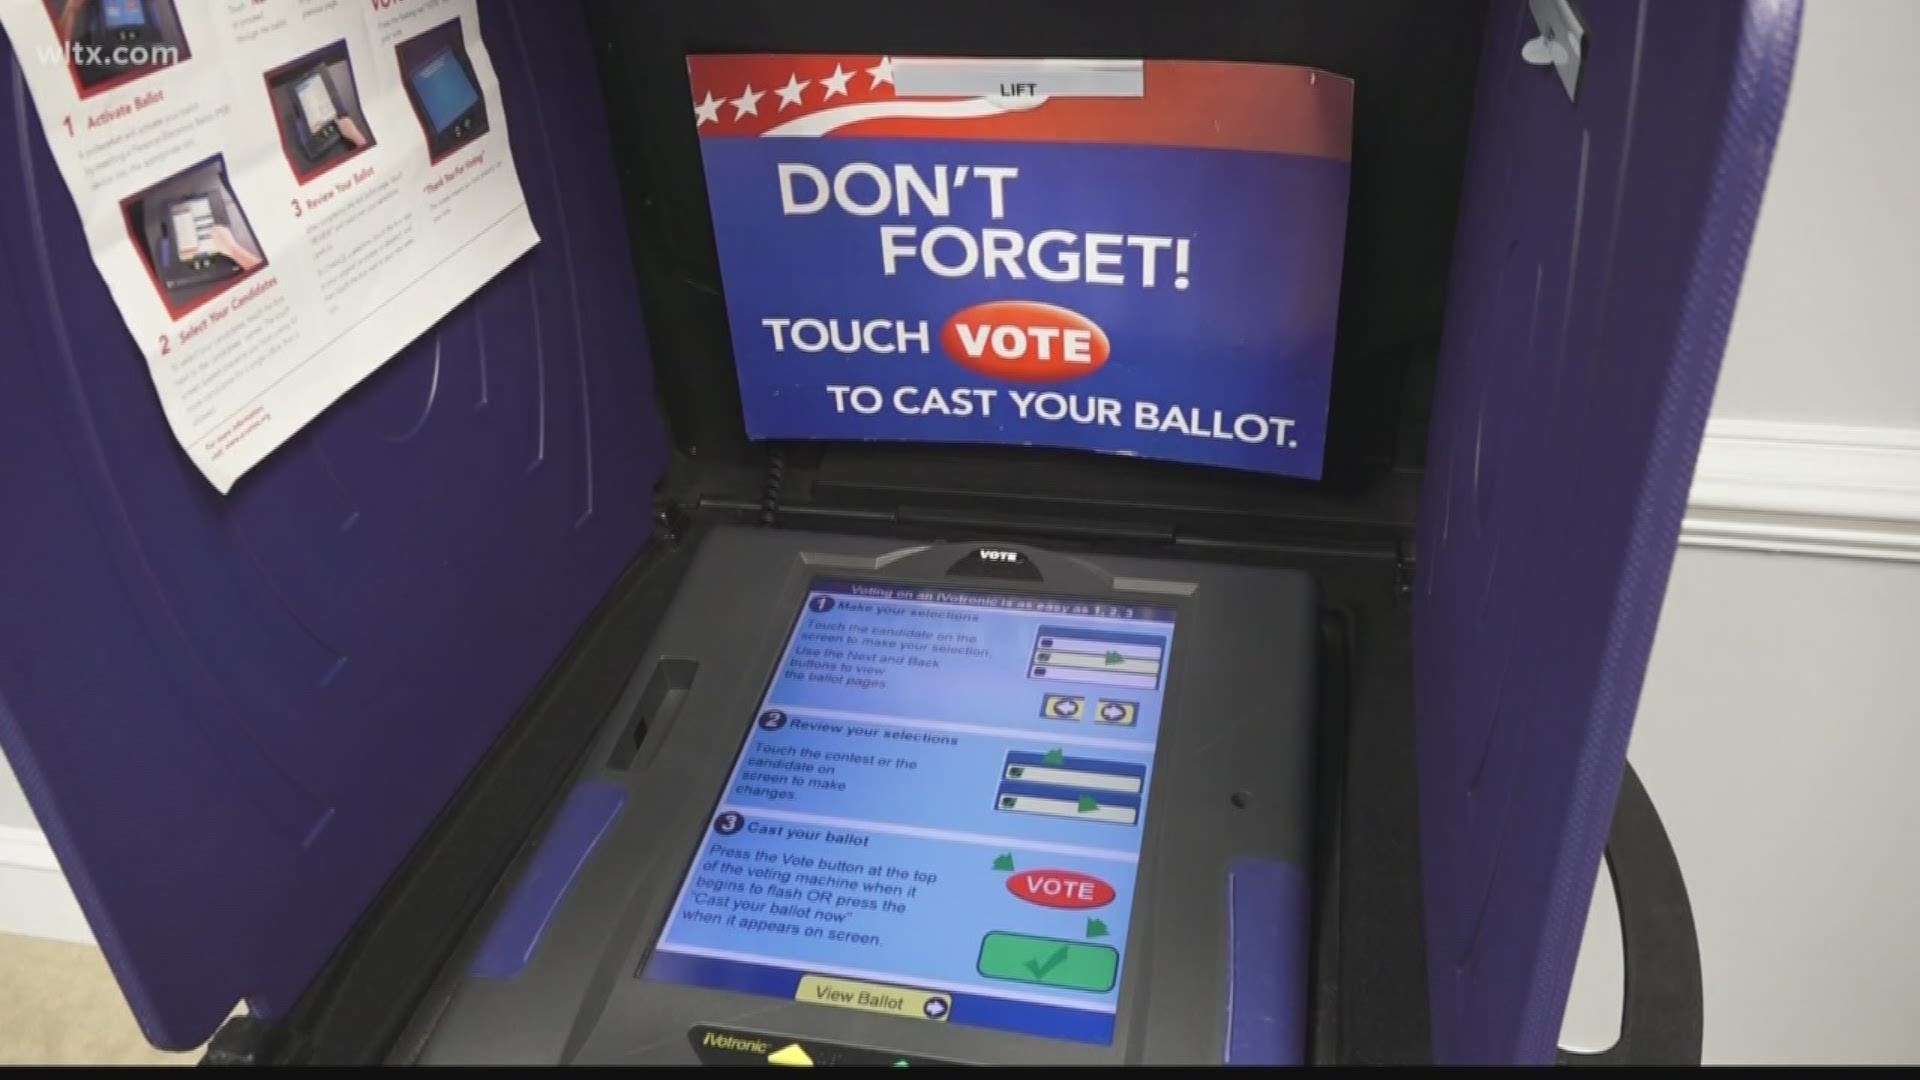 United States Representative Jim Clyburn called for South Carolina to stop using its aging voting equipment.